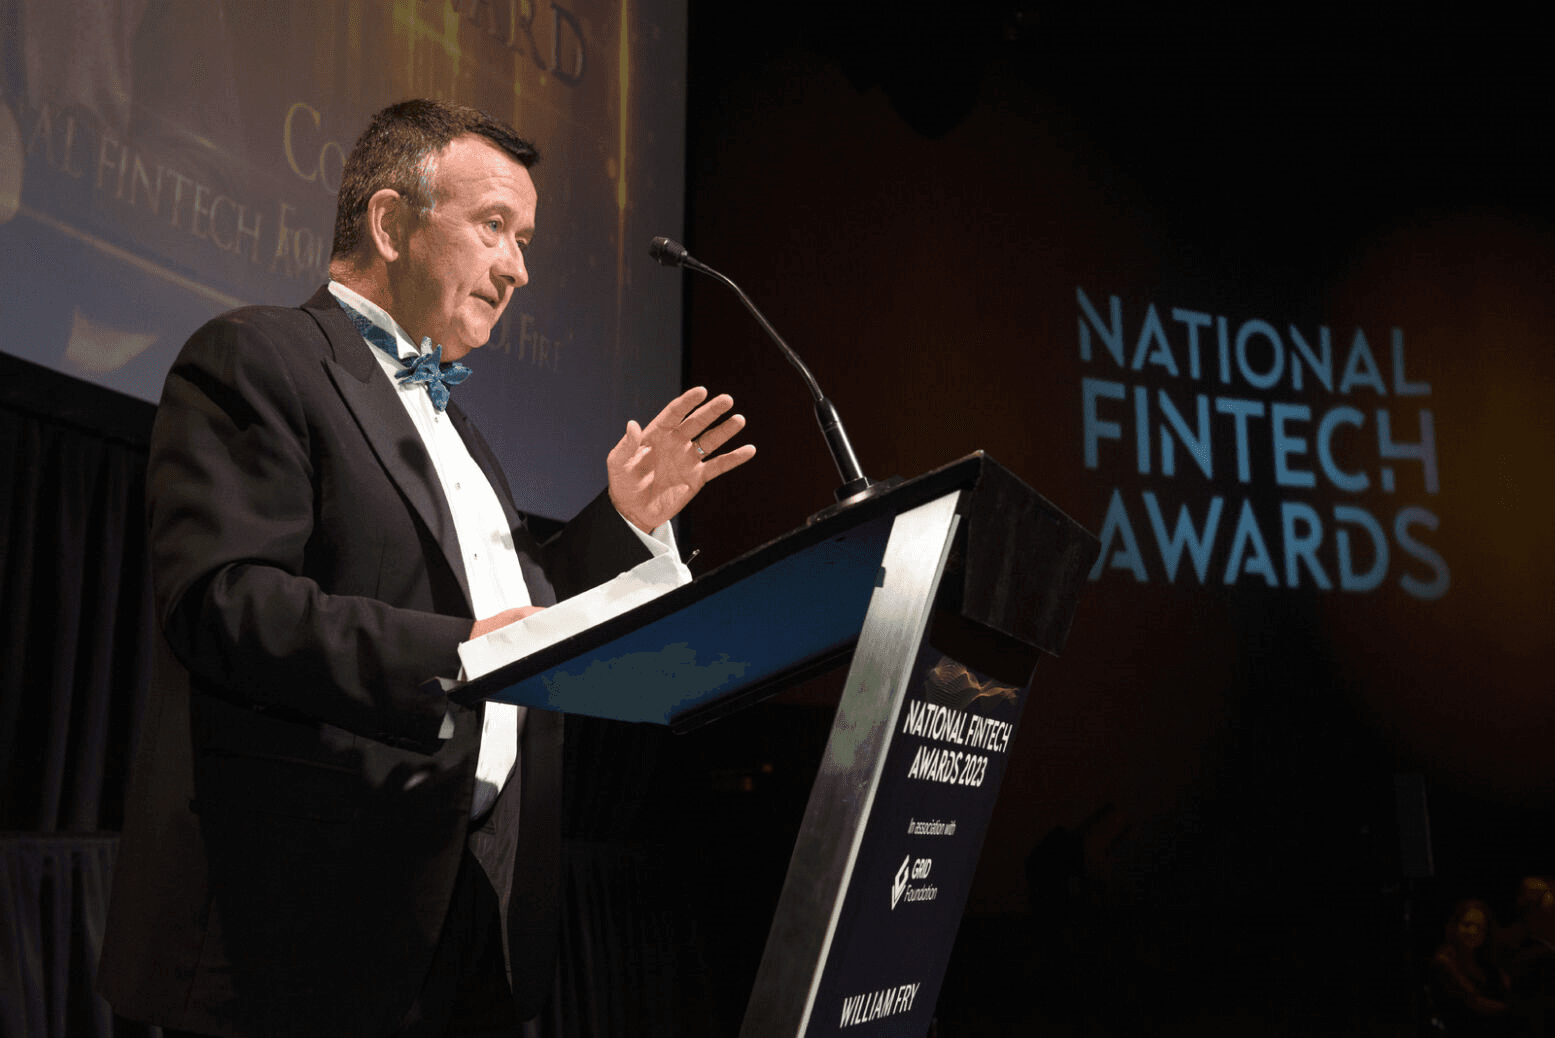 Colm Lyon holding a speech after receiving the Outstanding Achievement Award at the National Fintech Awards